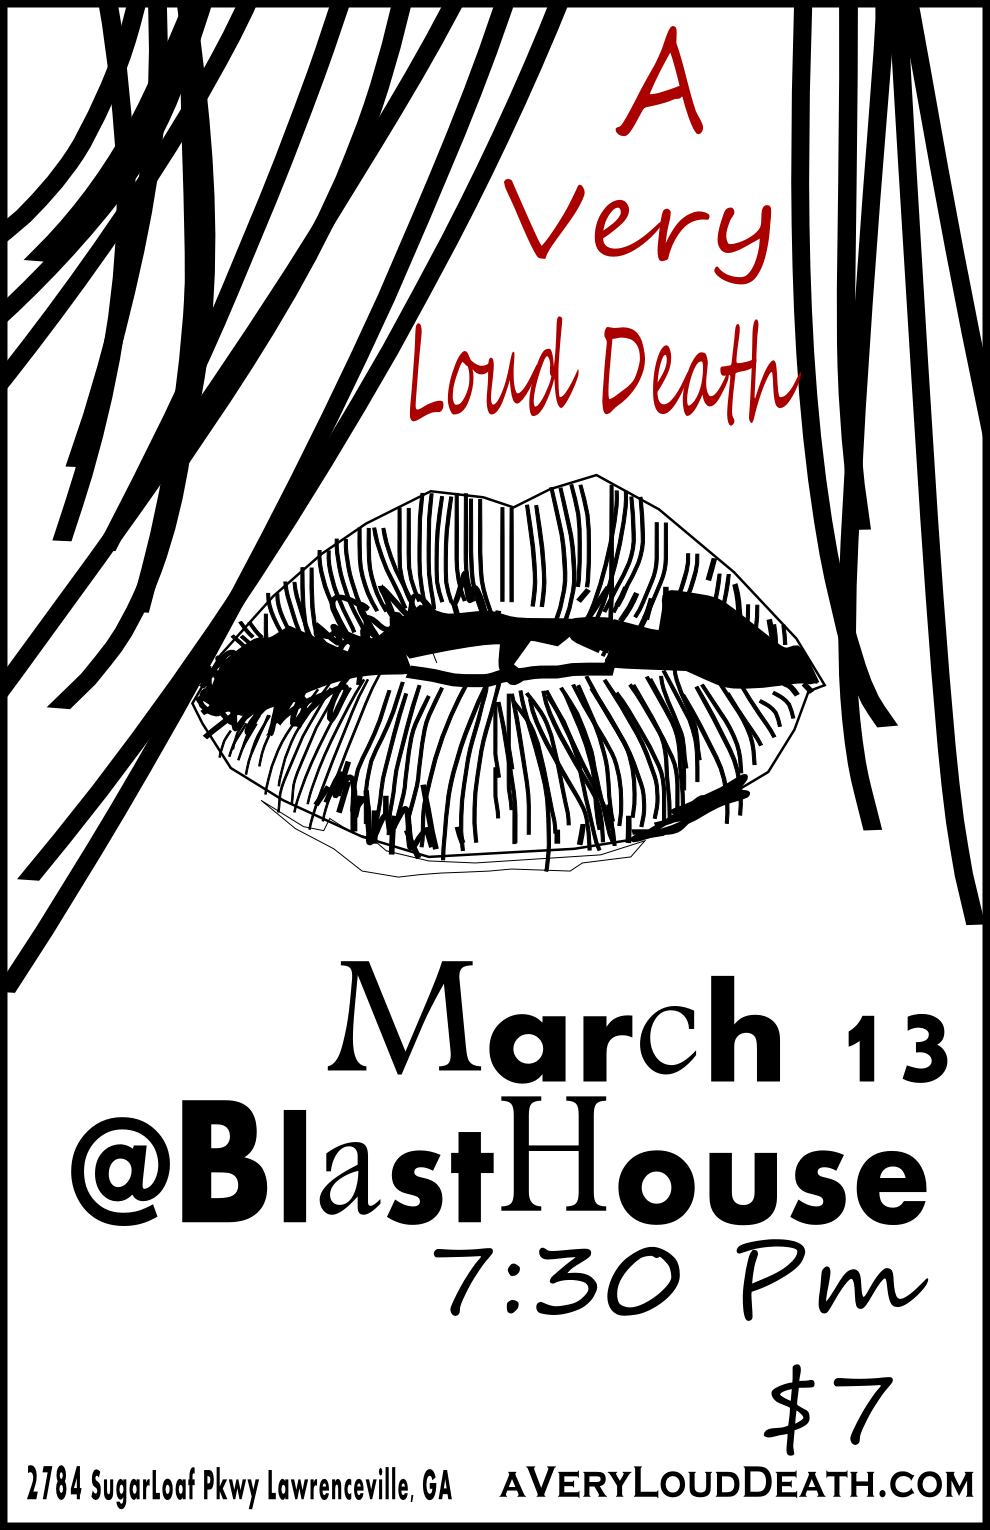 BlastHouse March 13